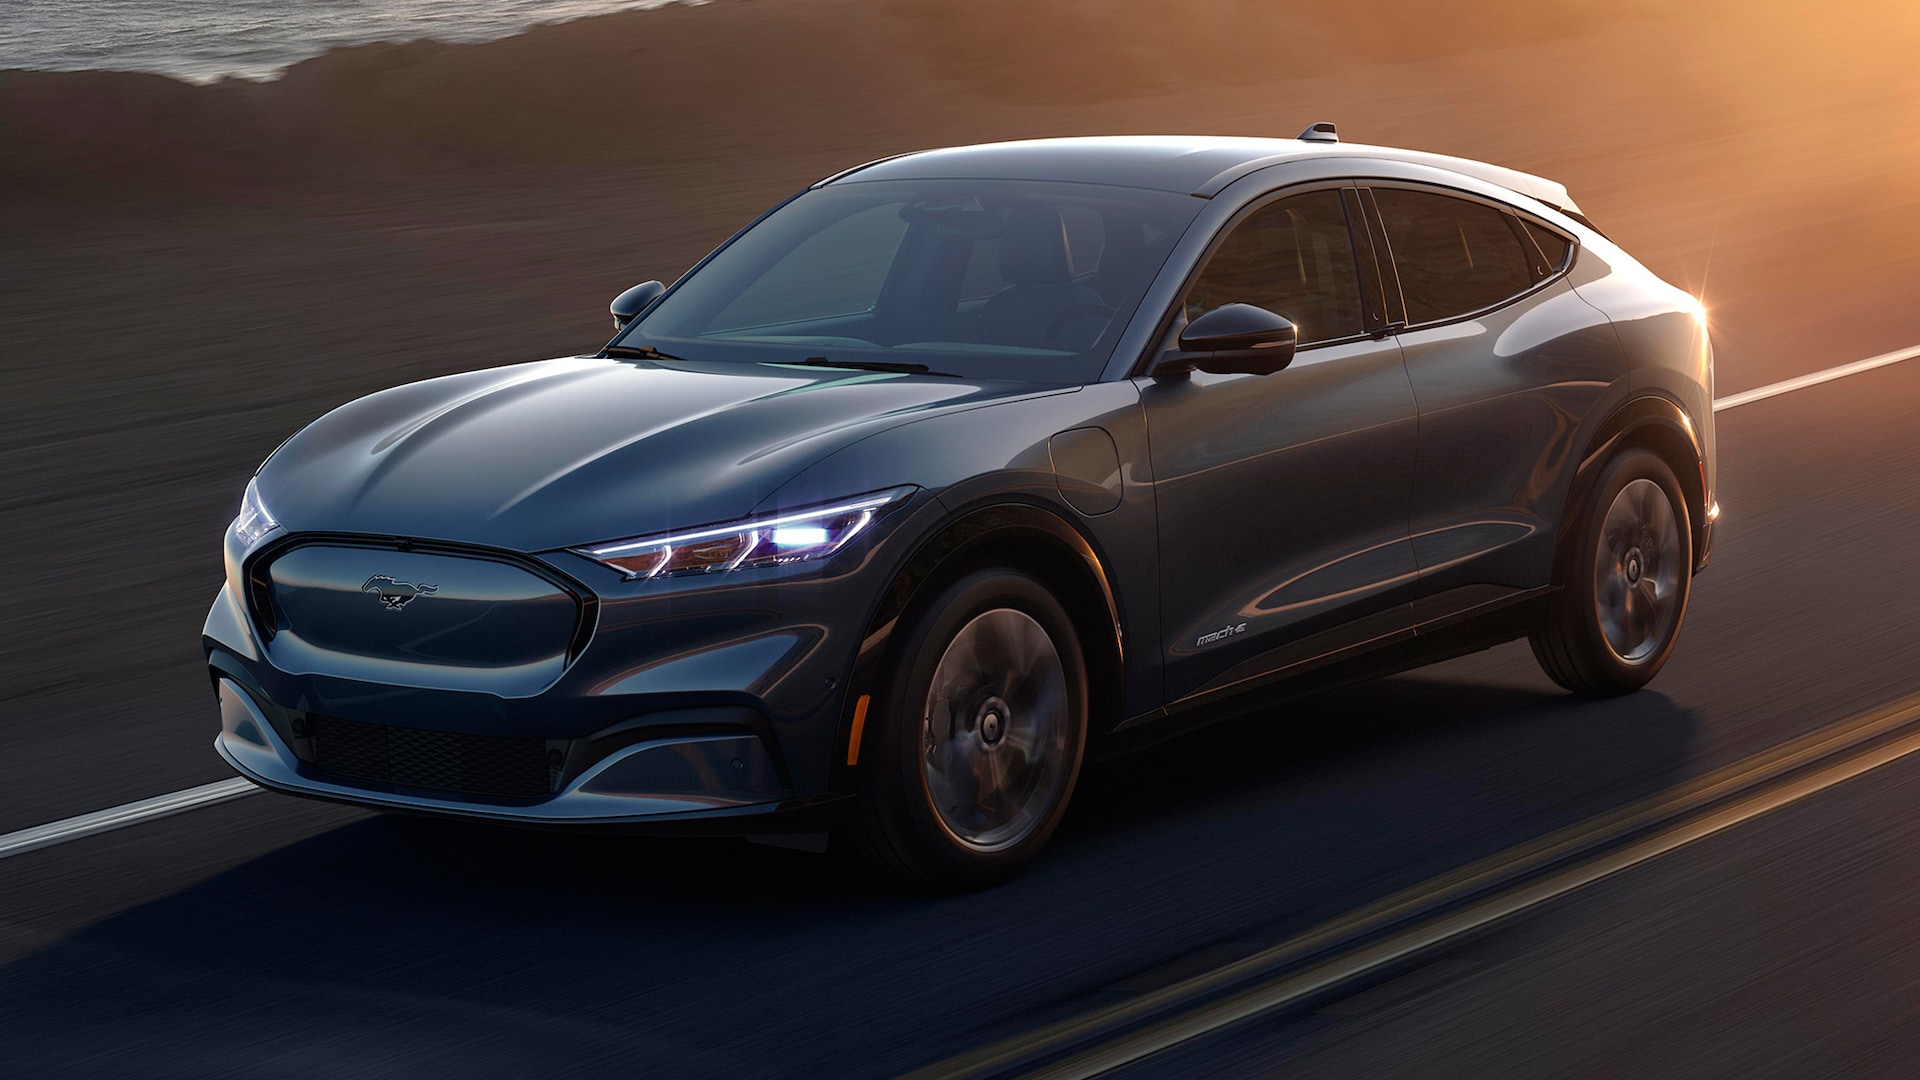 2021 Ford Mustang Mach-E: Impressions From a Ride in Ford's New Electric SUV